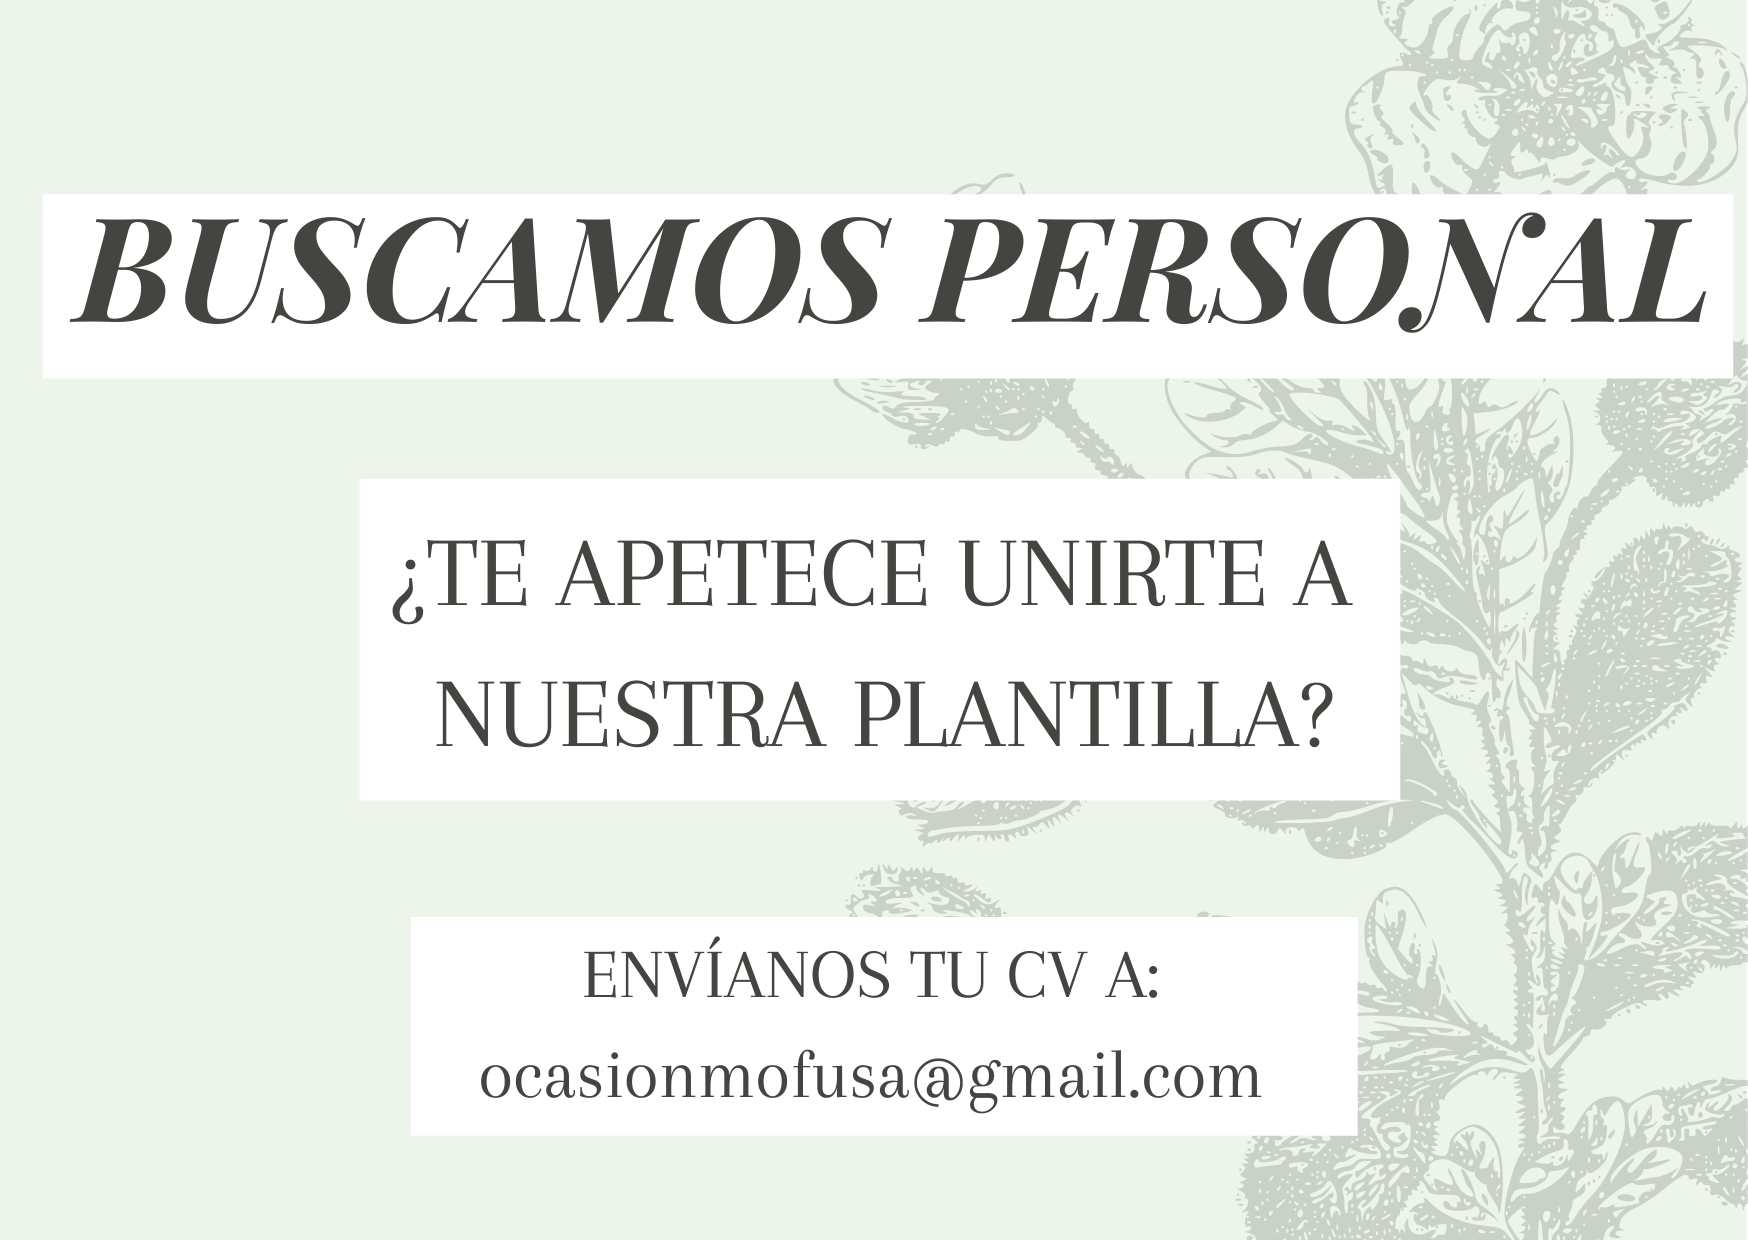 ¡ BUSCAMOS PERSONAL !